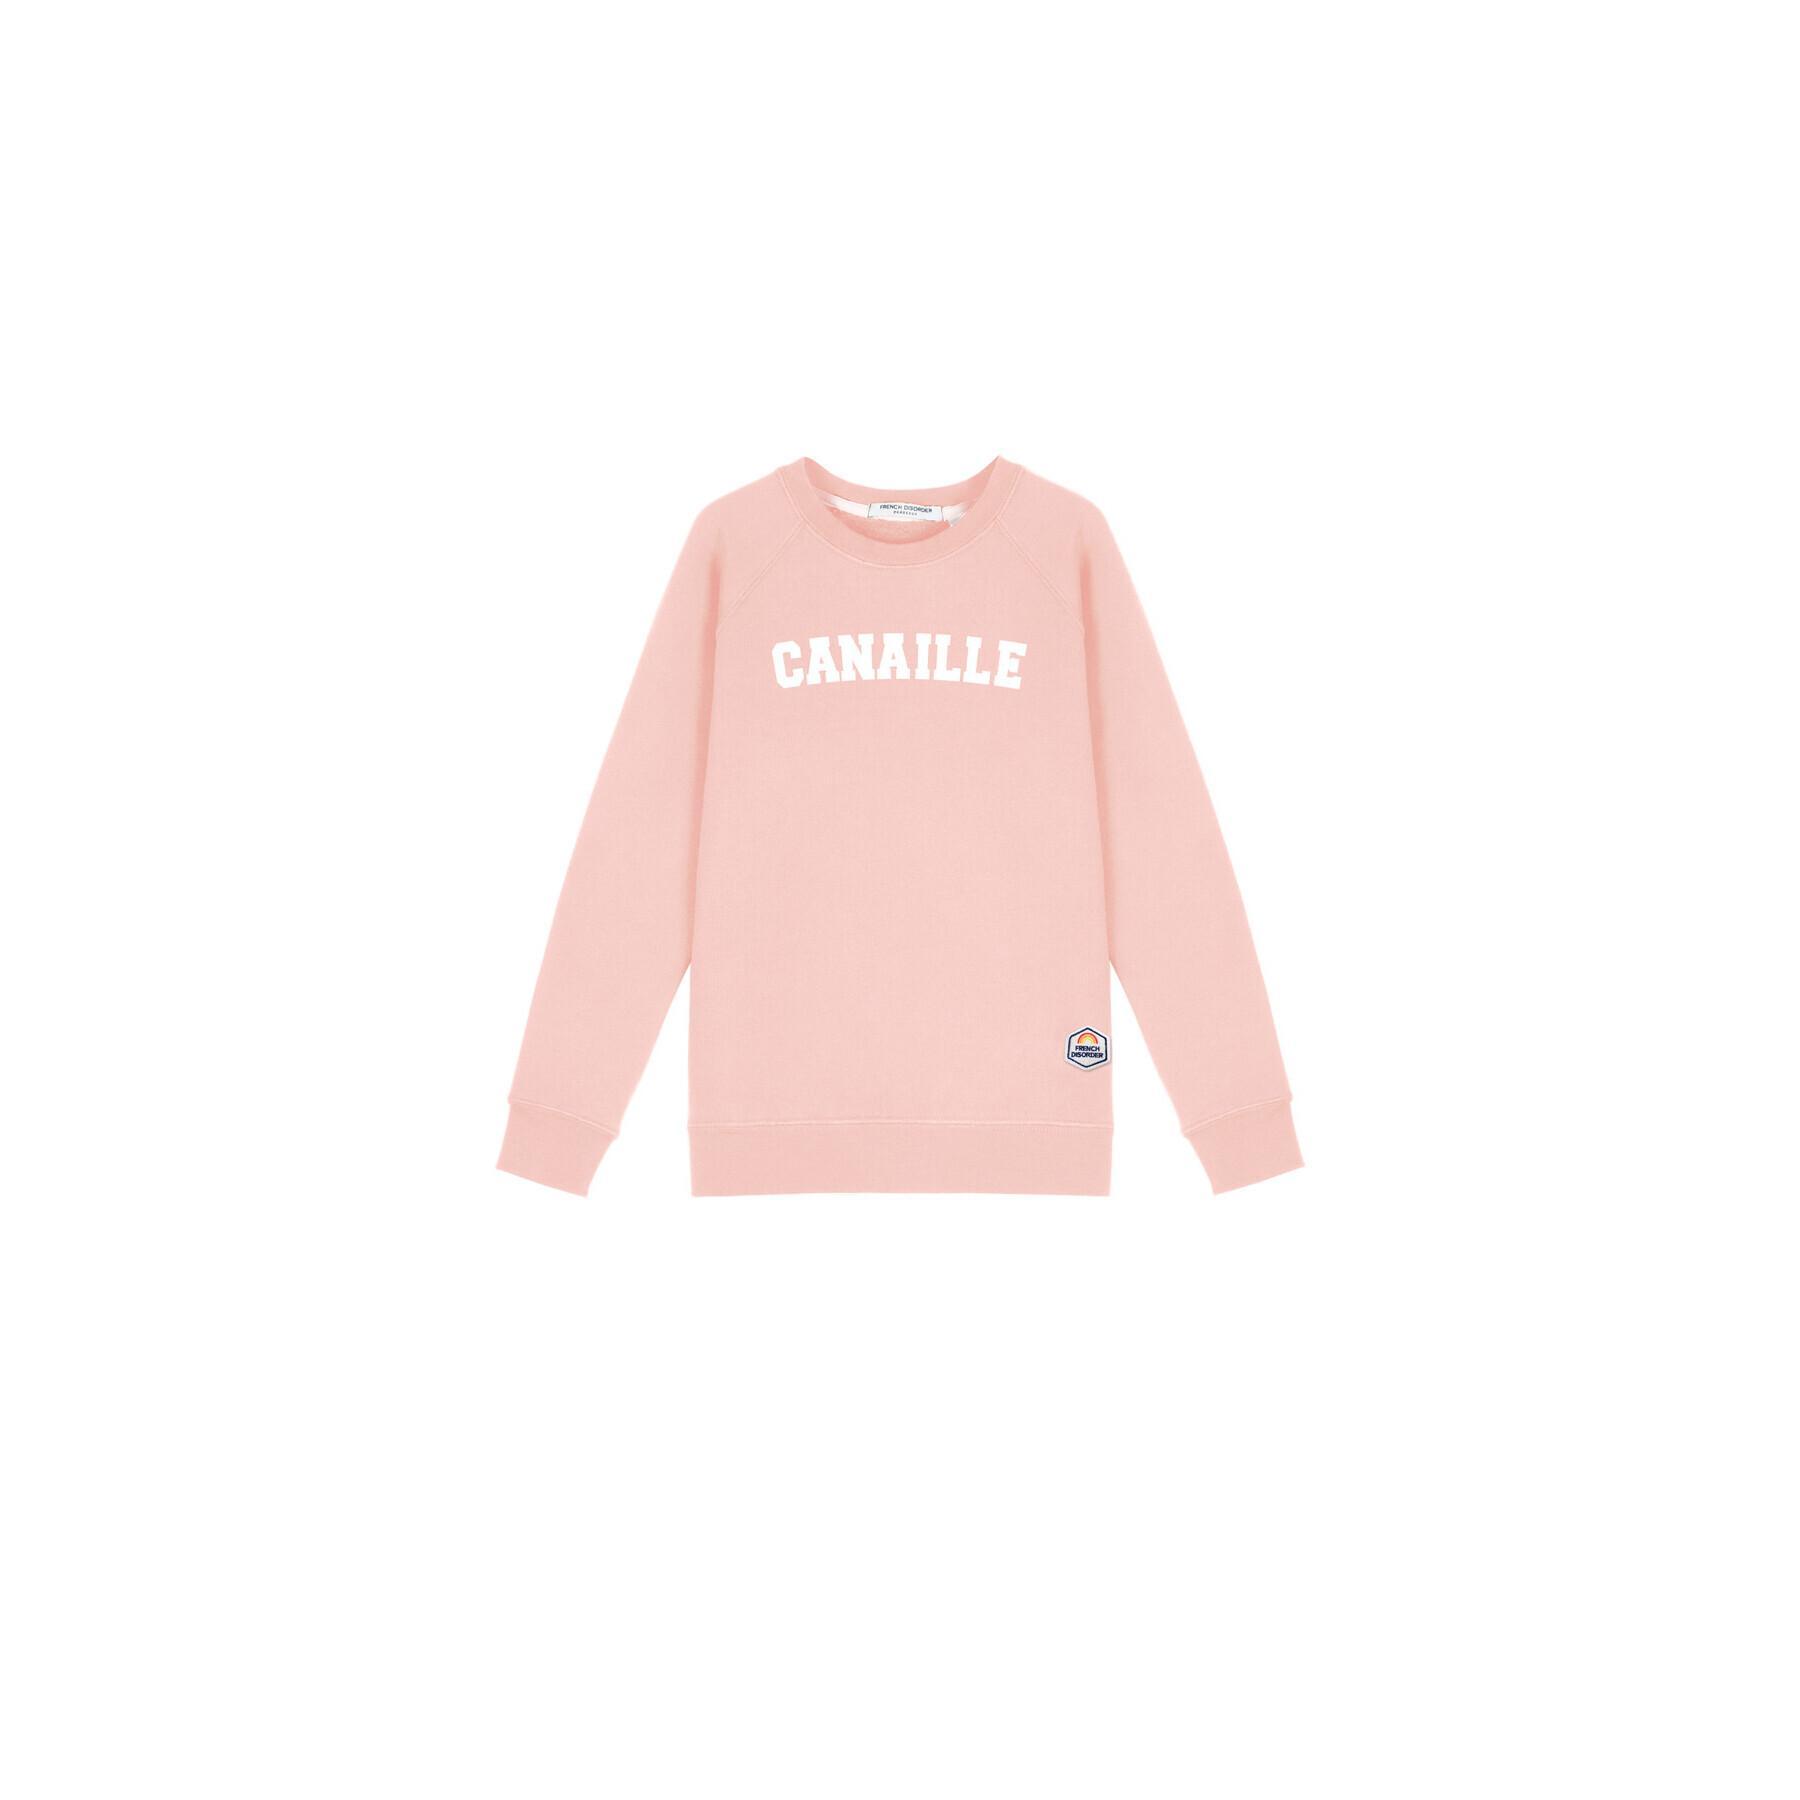 Sweatshirt enfant French Disorder Billy Canaille